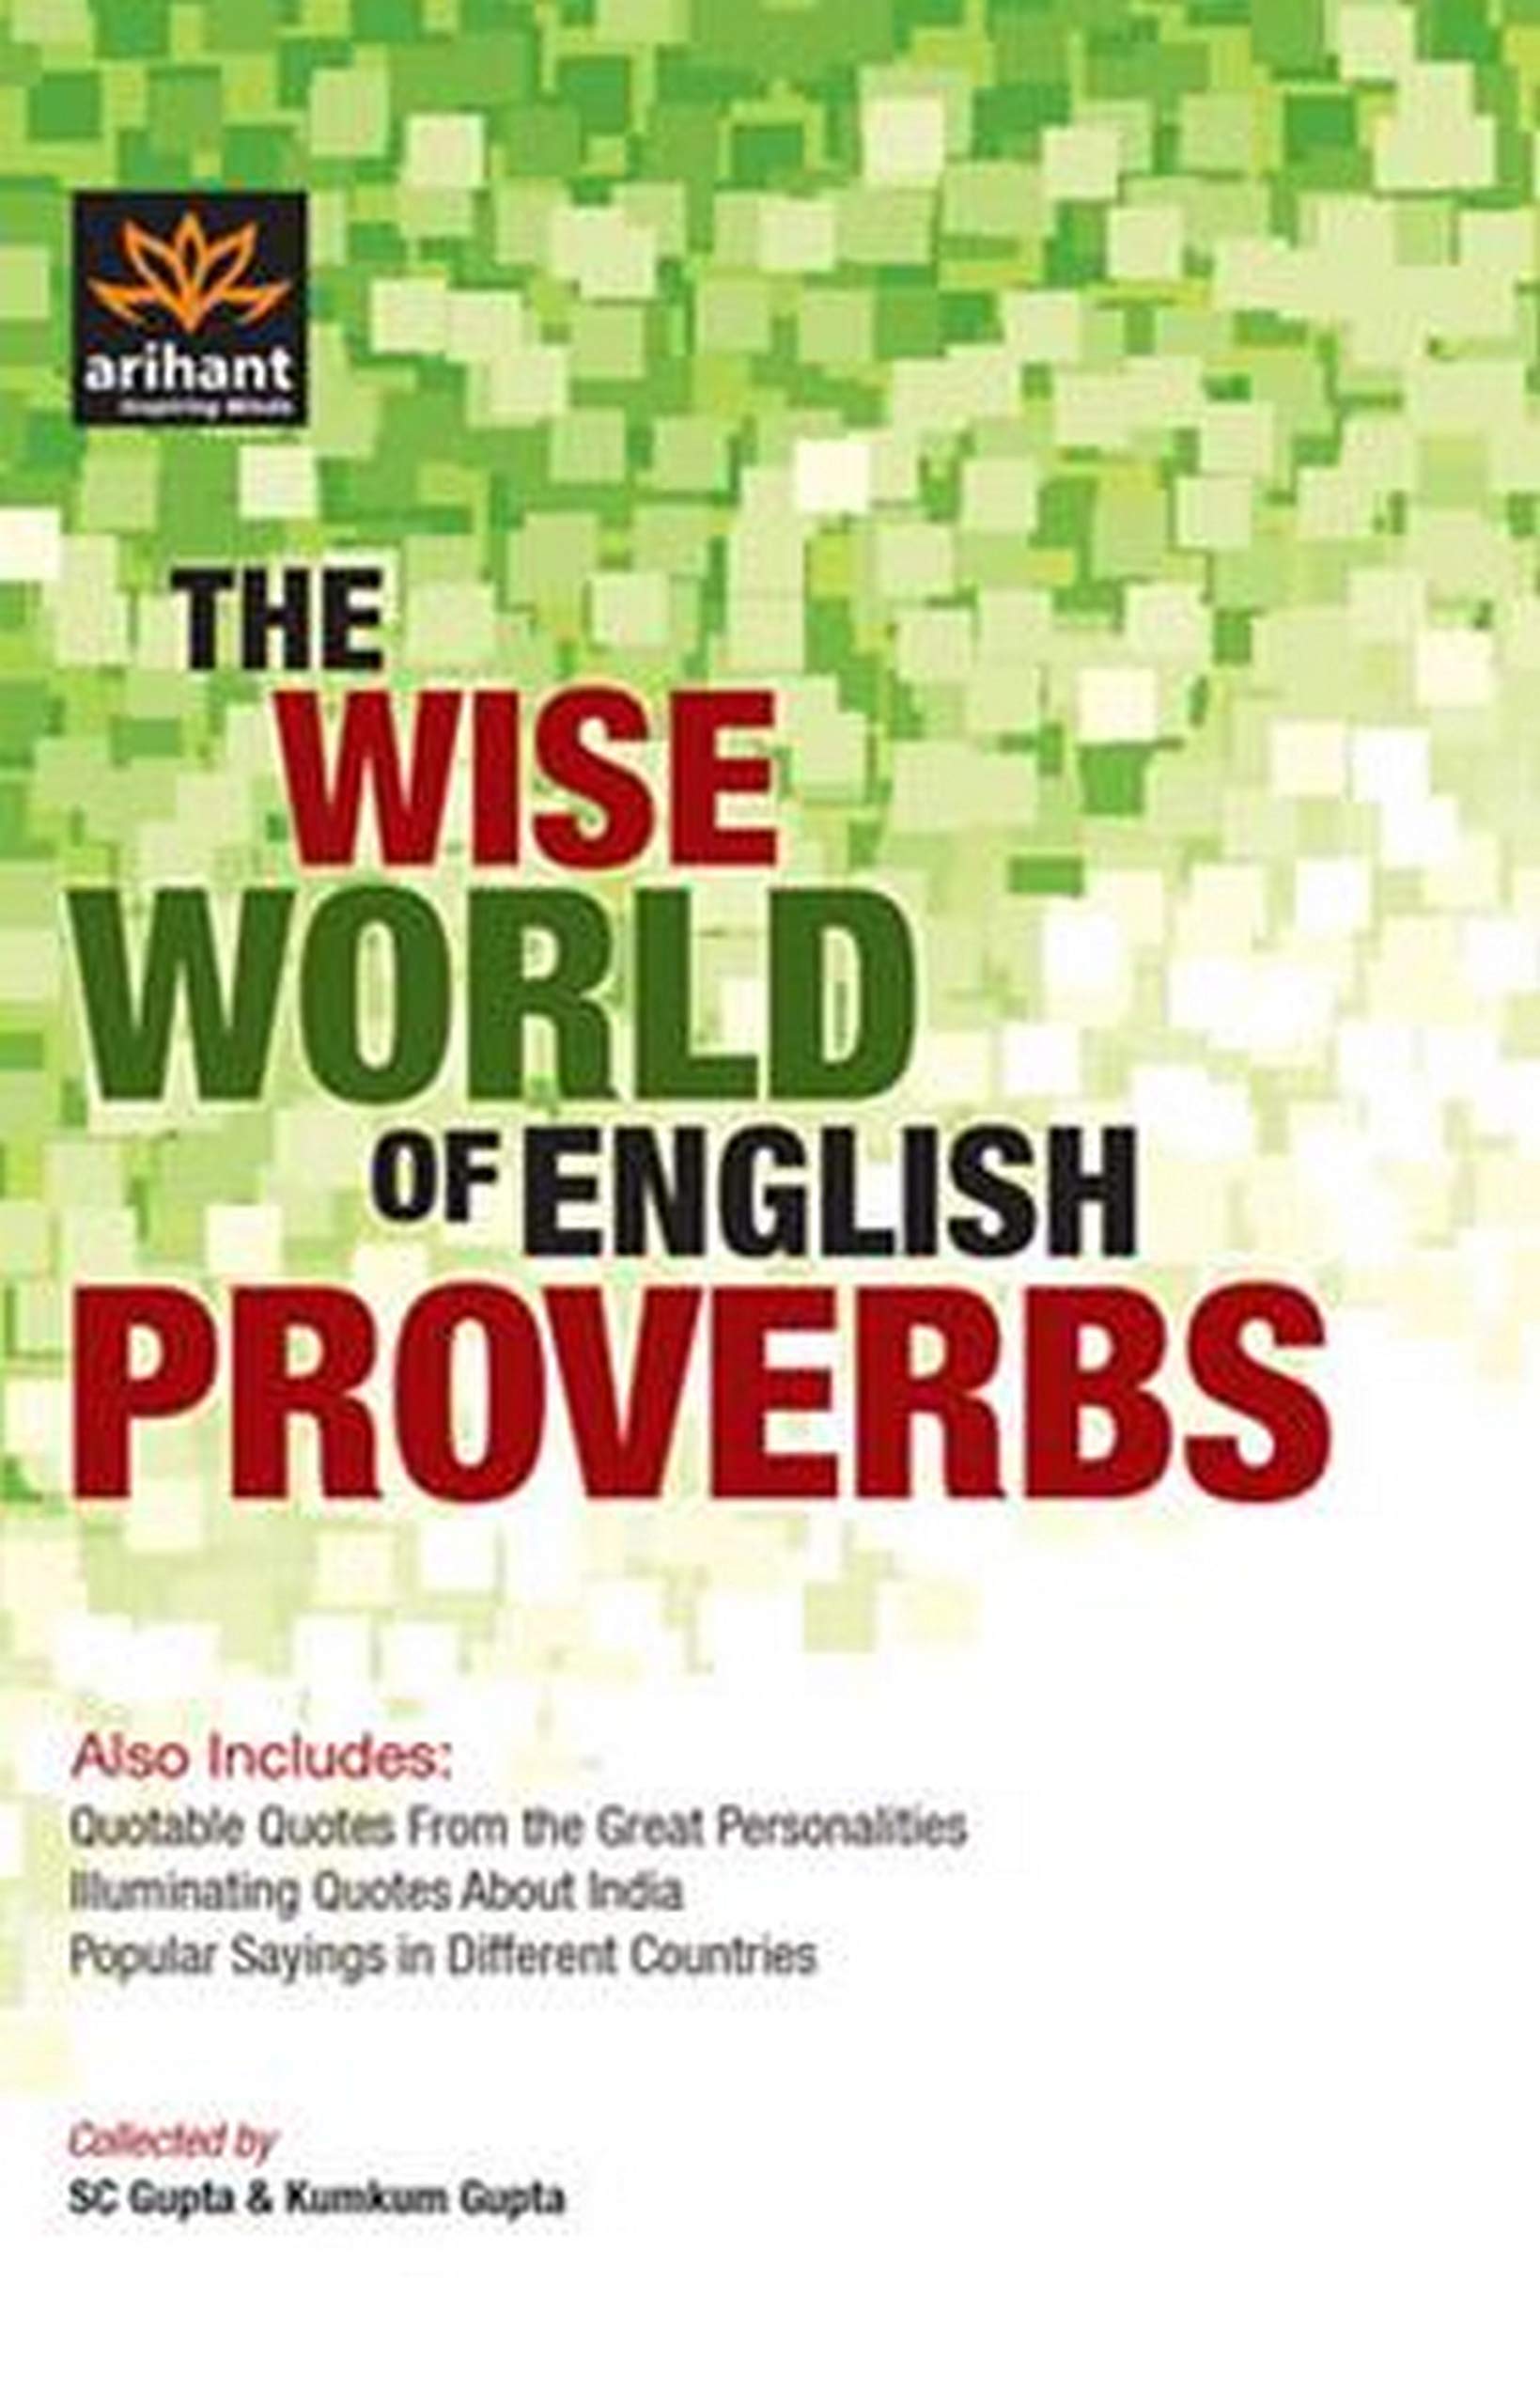 THE WISe WORLD OF ENGLISH PROVERBS